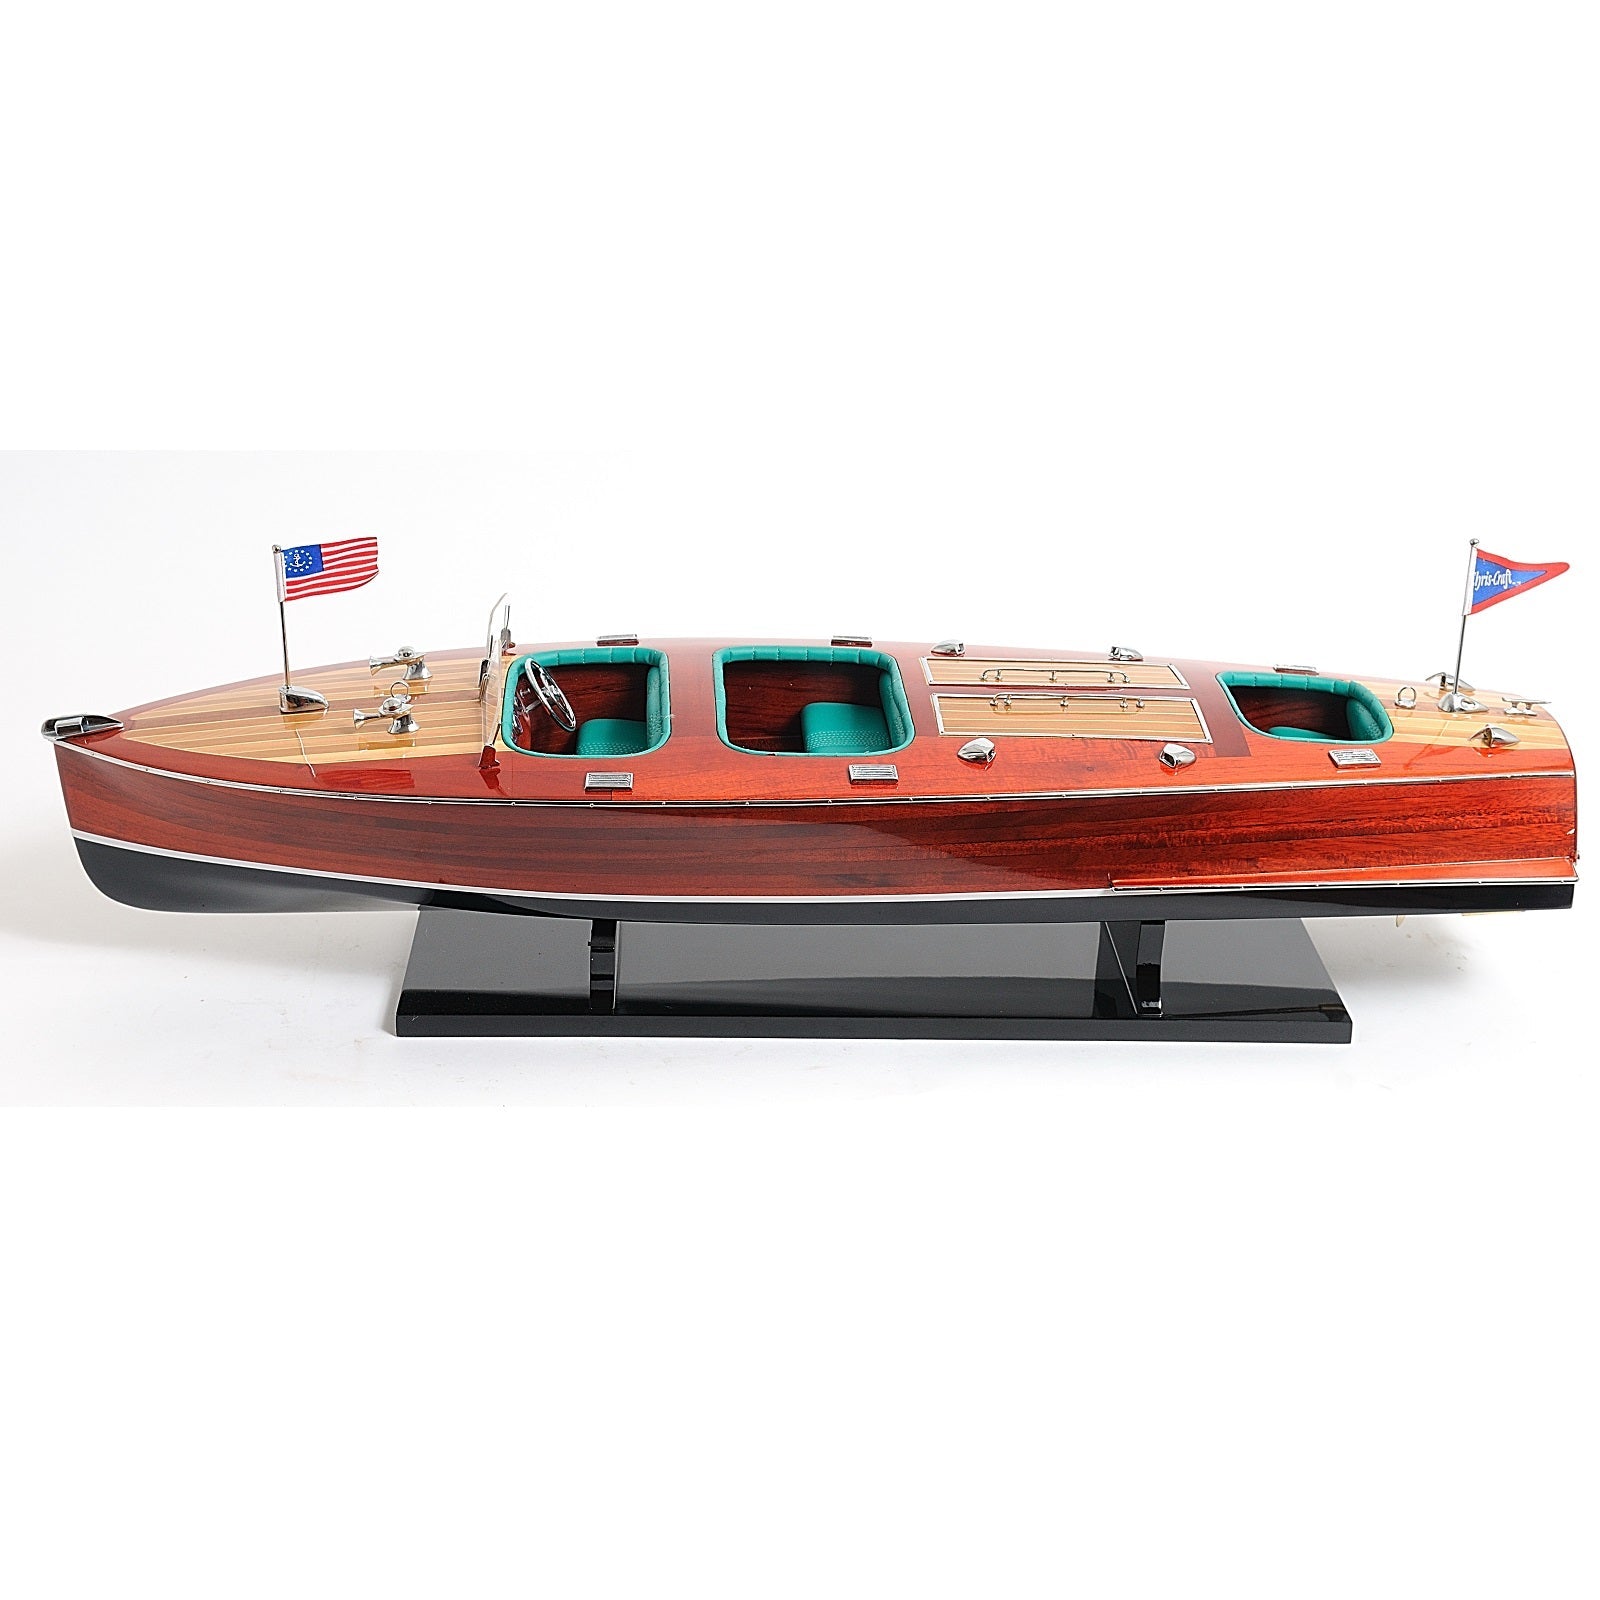 Chris Craft Triple Cockpit Painted Hull Version, Fully Assembled